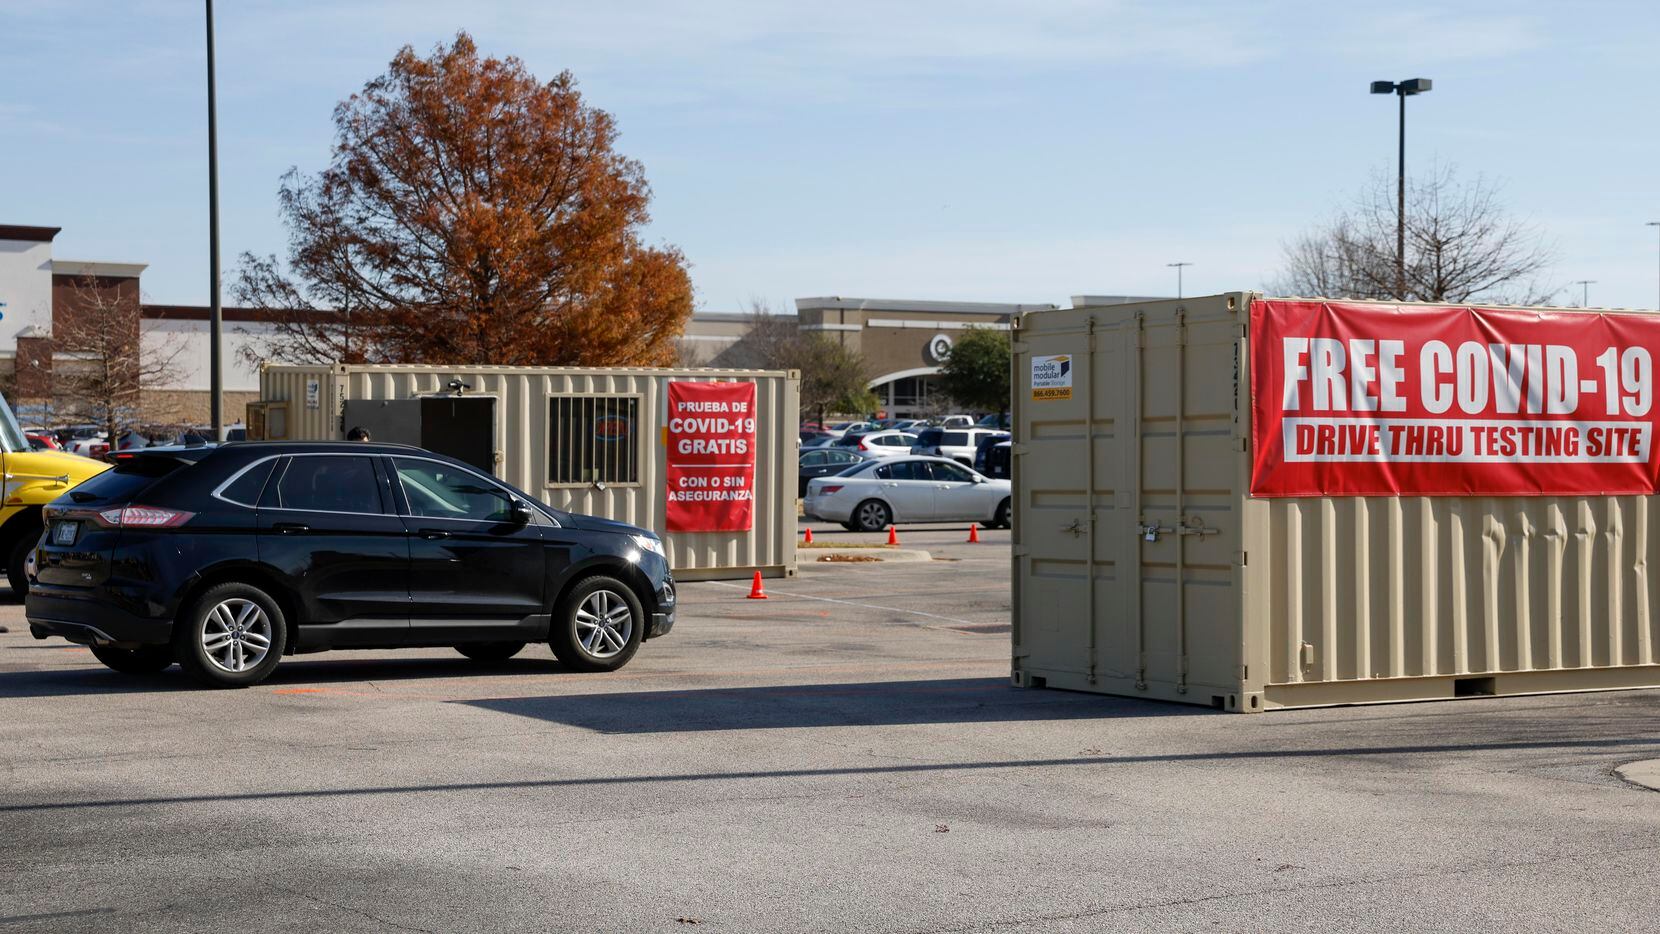 A car waits in line at a COVID-19 testing location in Richardson, Texas, on Dec. 24, 2021.